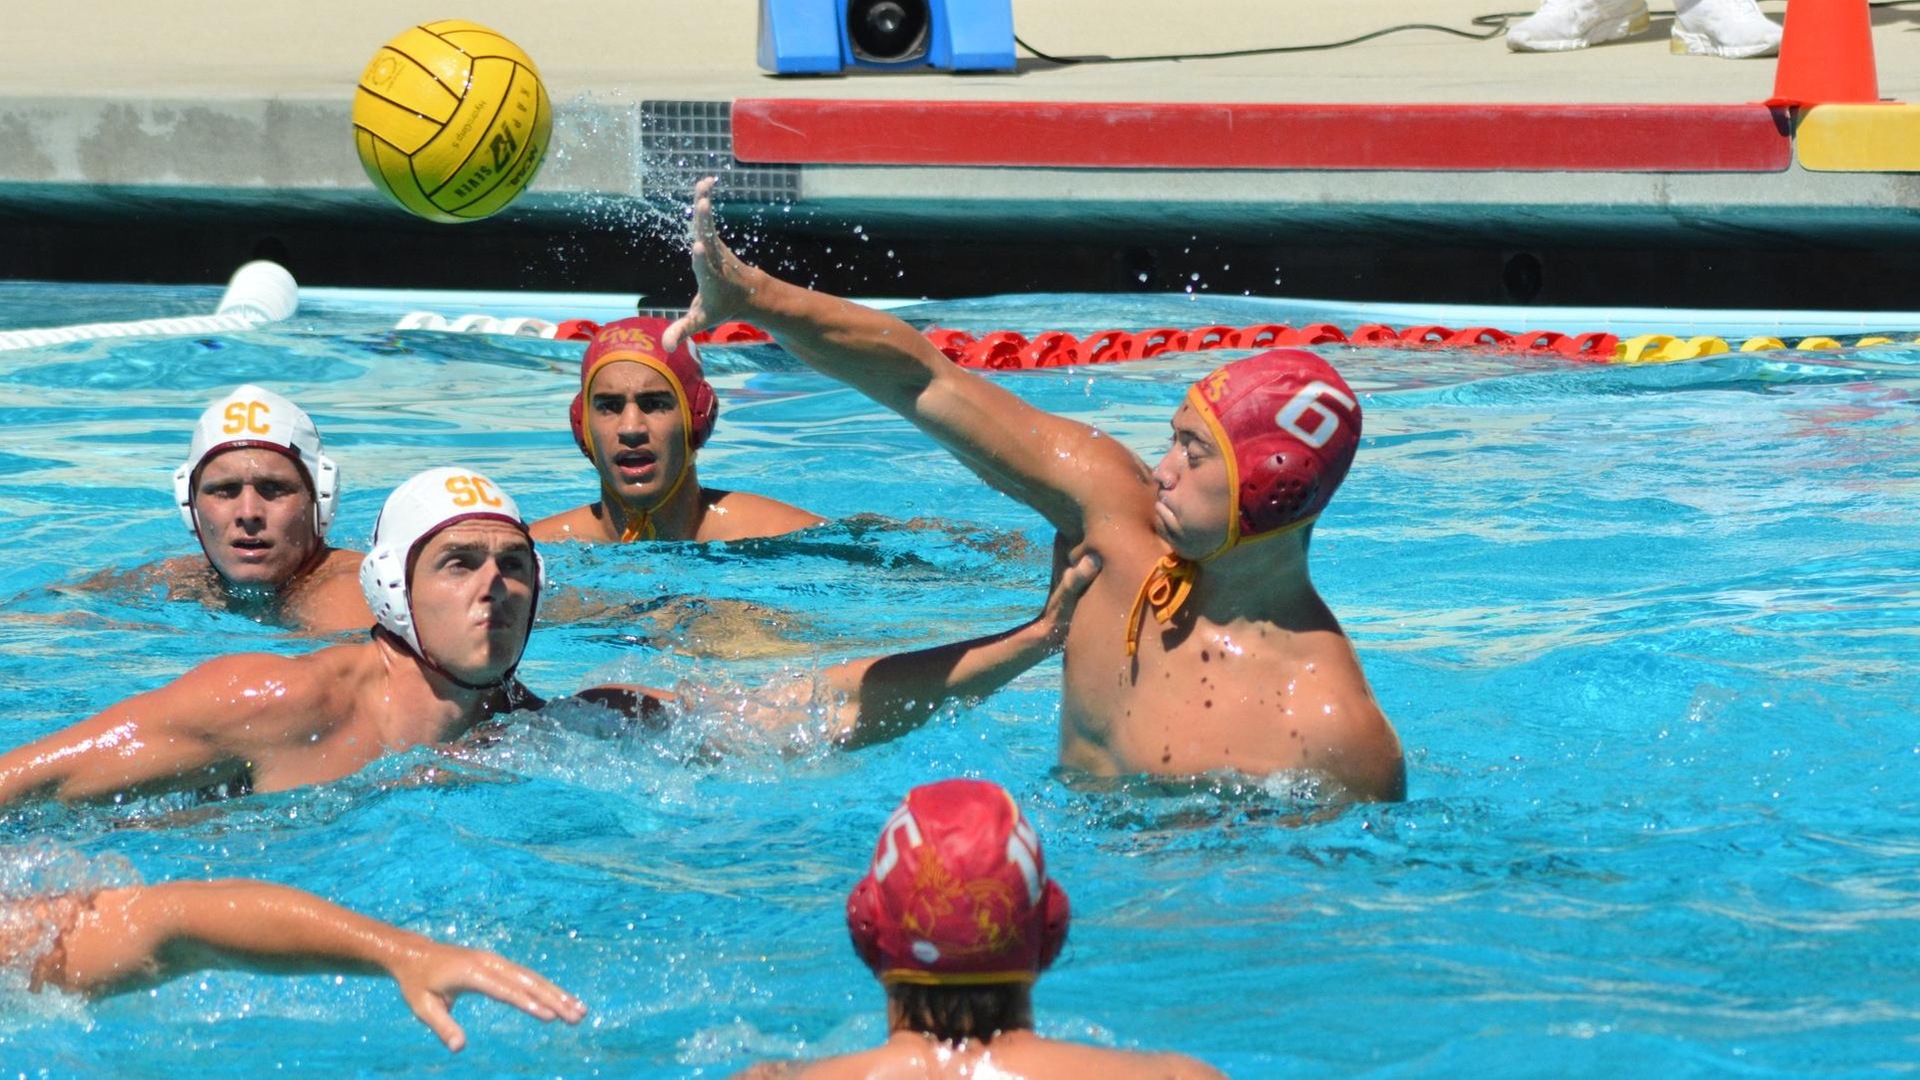 Kyle Ballack had one of the five goals for CMS against USC (photo by Tessa Guerra)